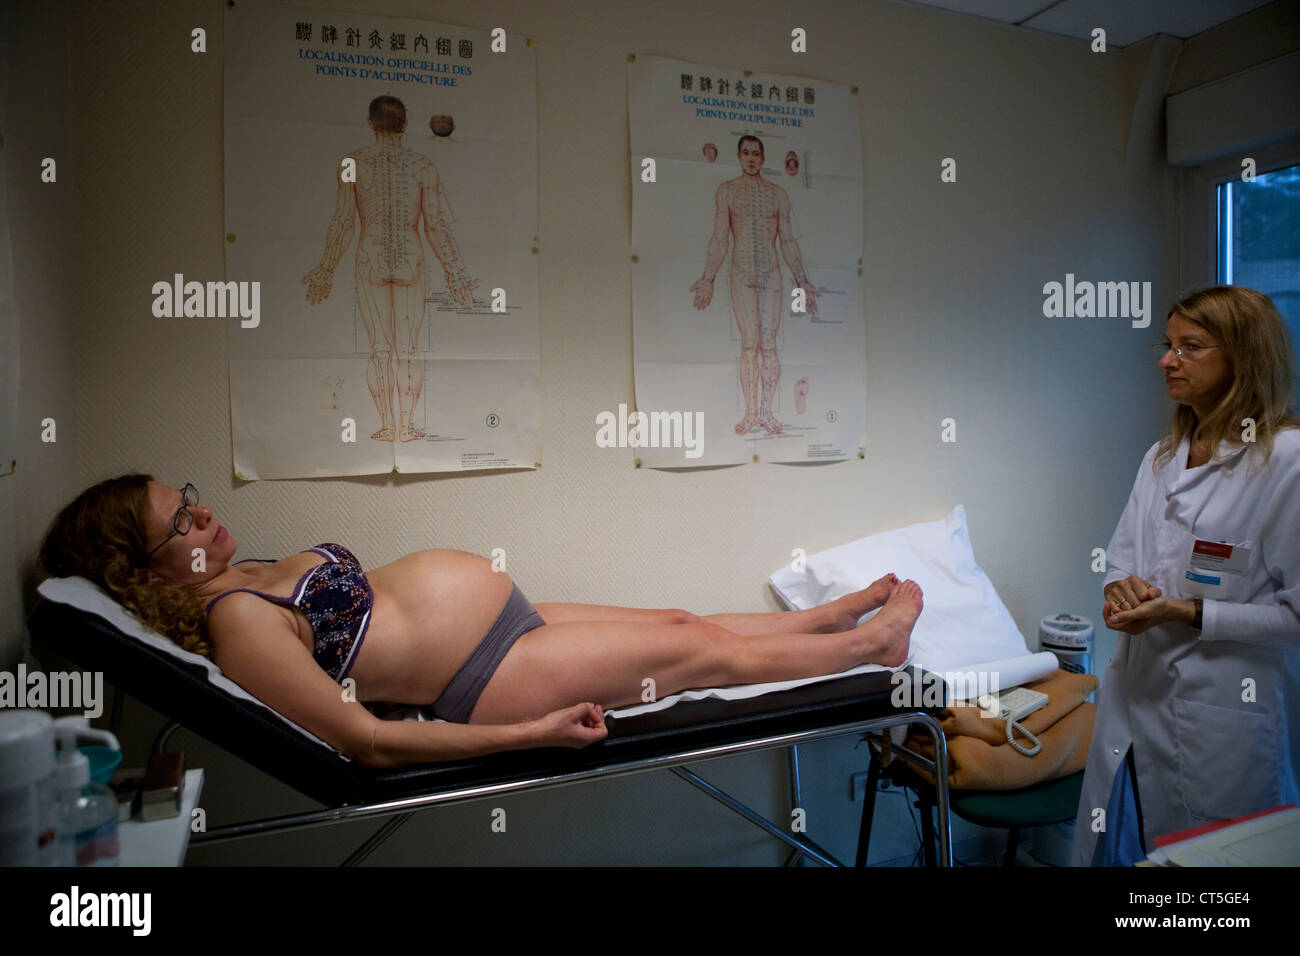 ACUPUNCTURE PREGNANT WOMAN Stock Photo